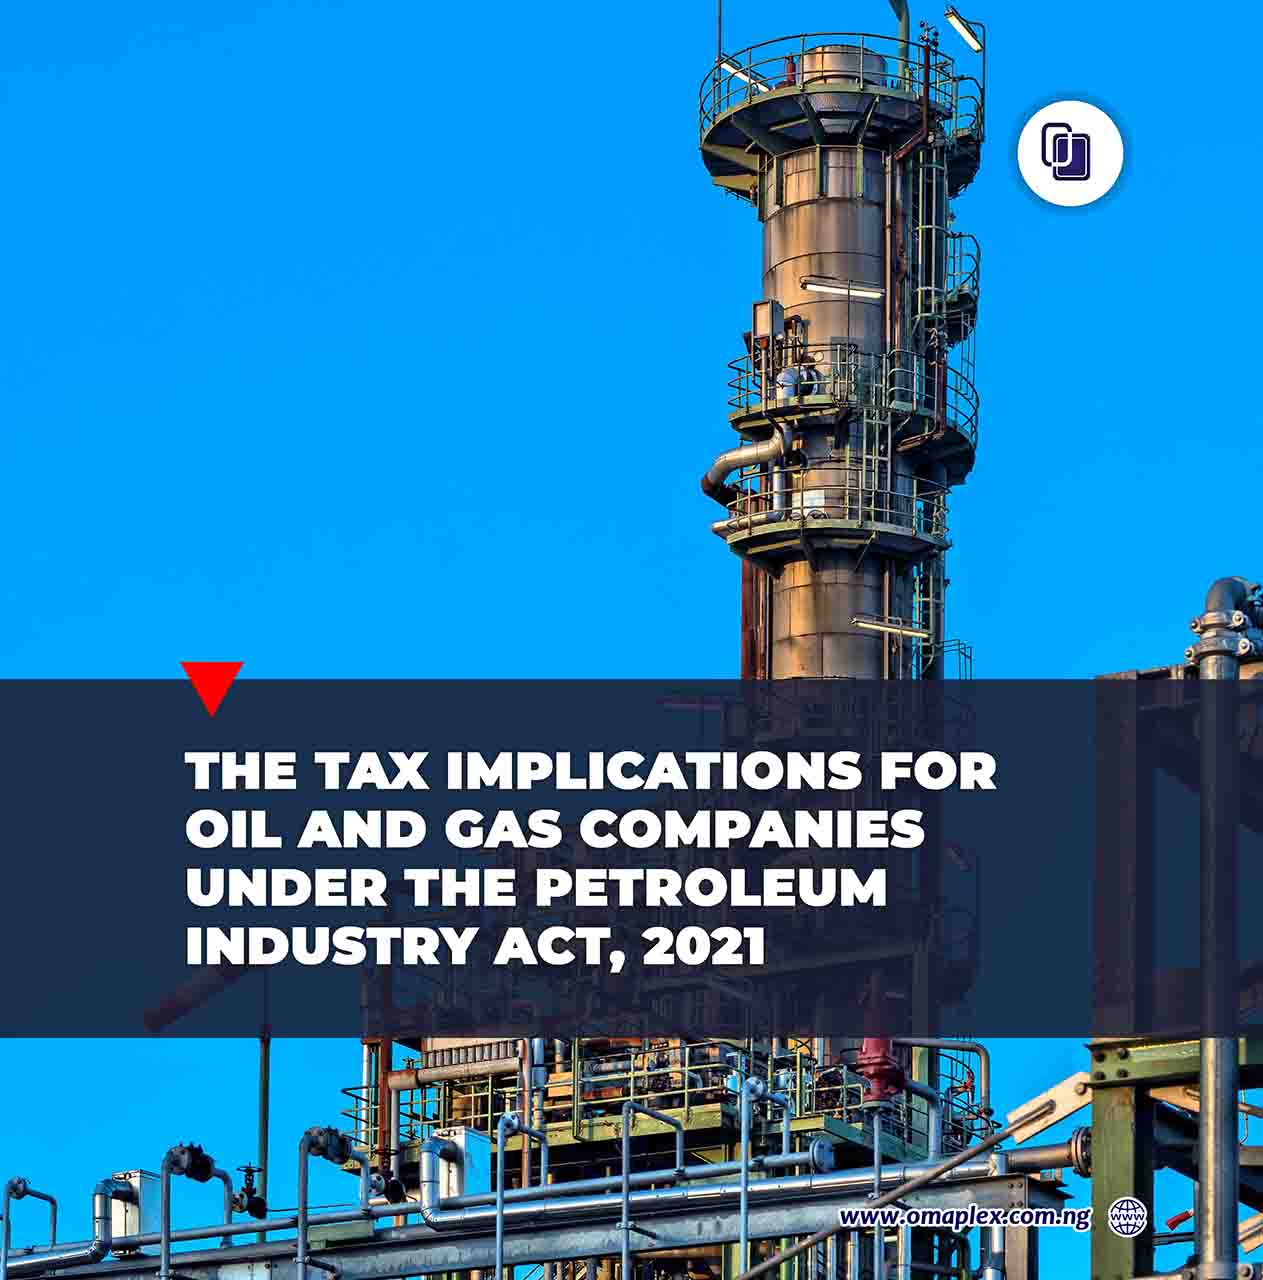 Tax-Implications-for-Oil-and-Gas-Companies-mobile-featured-image